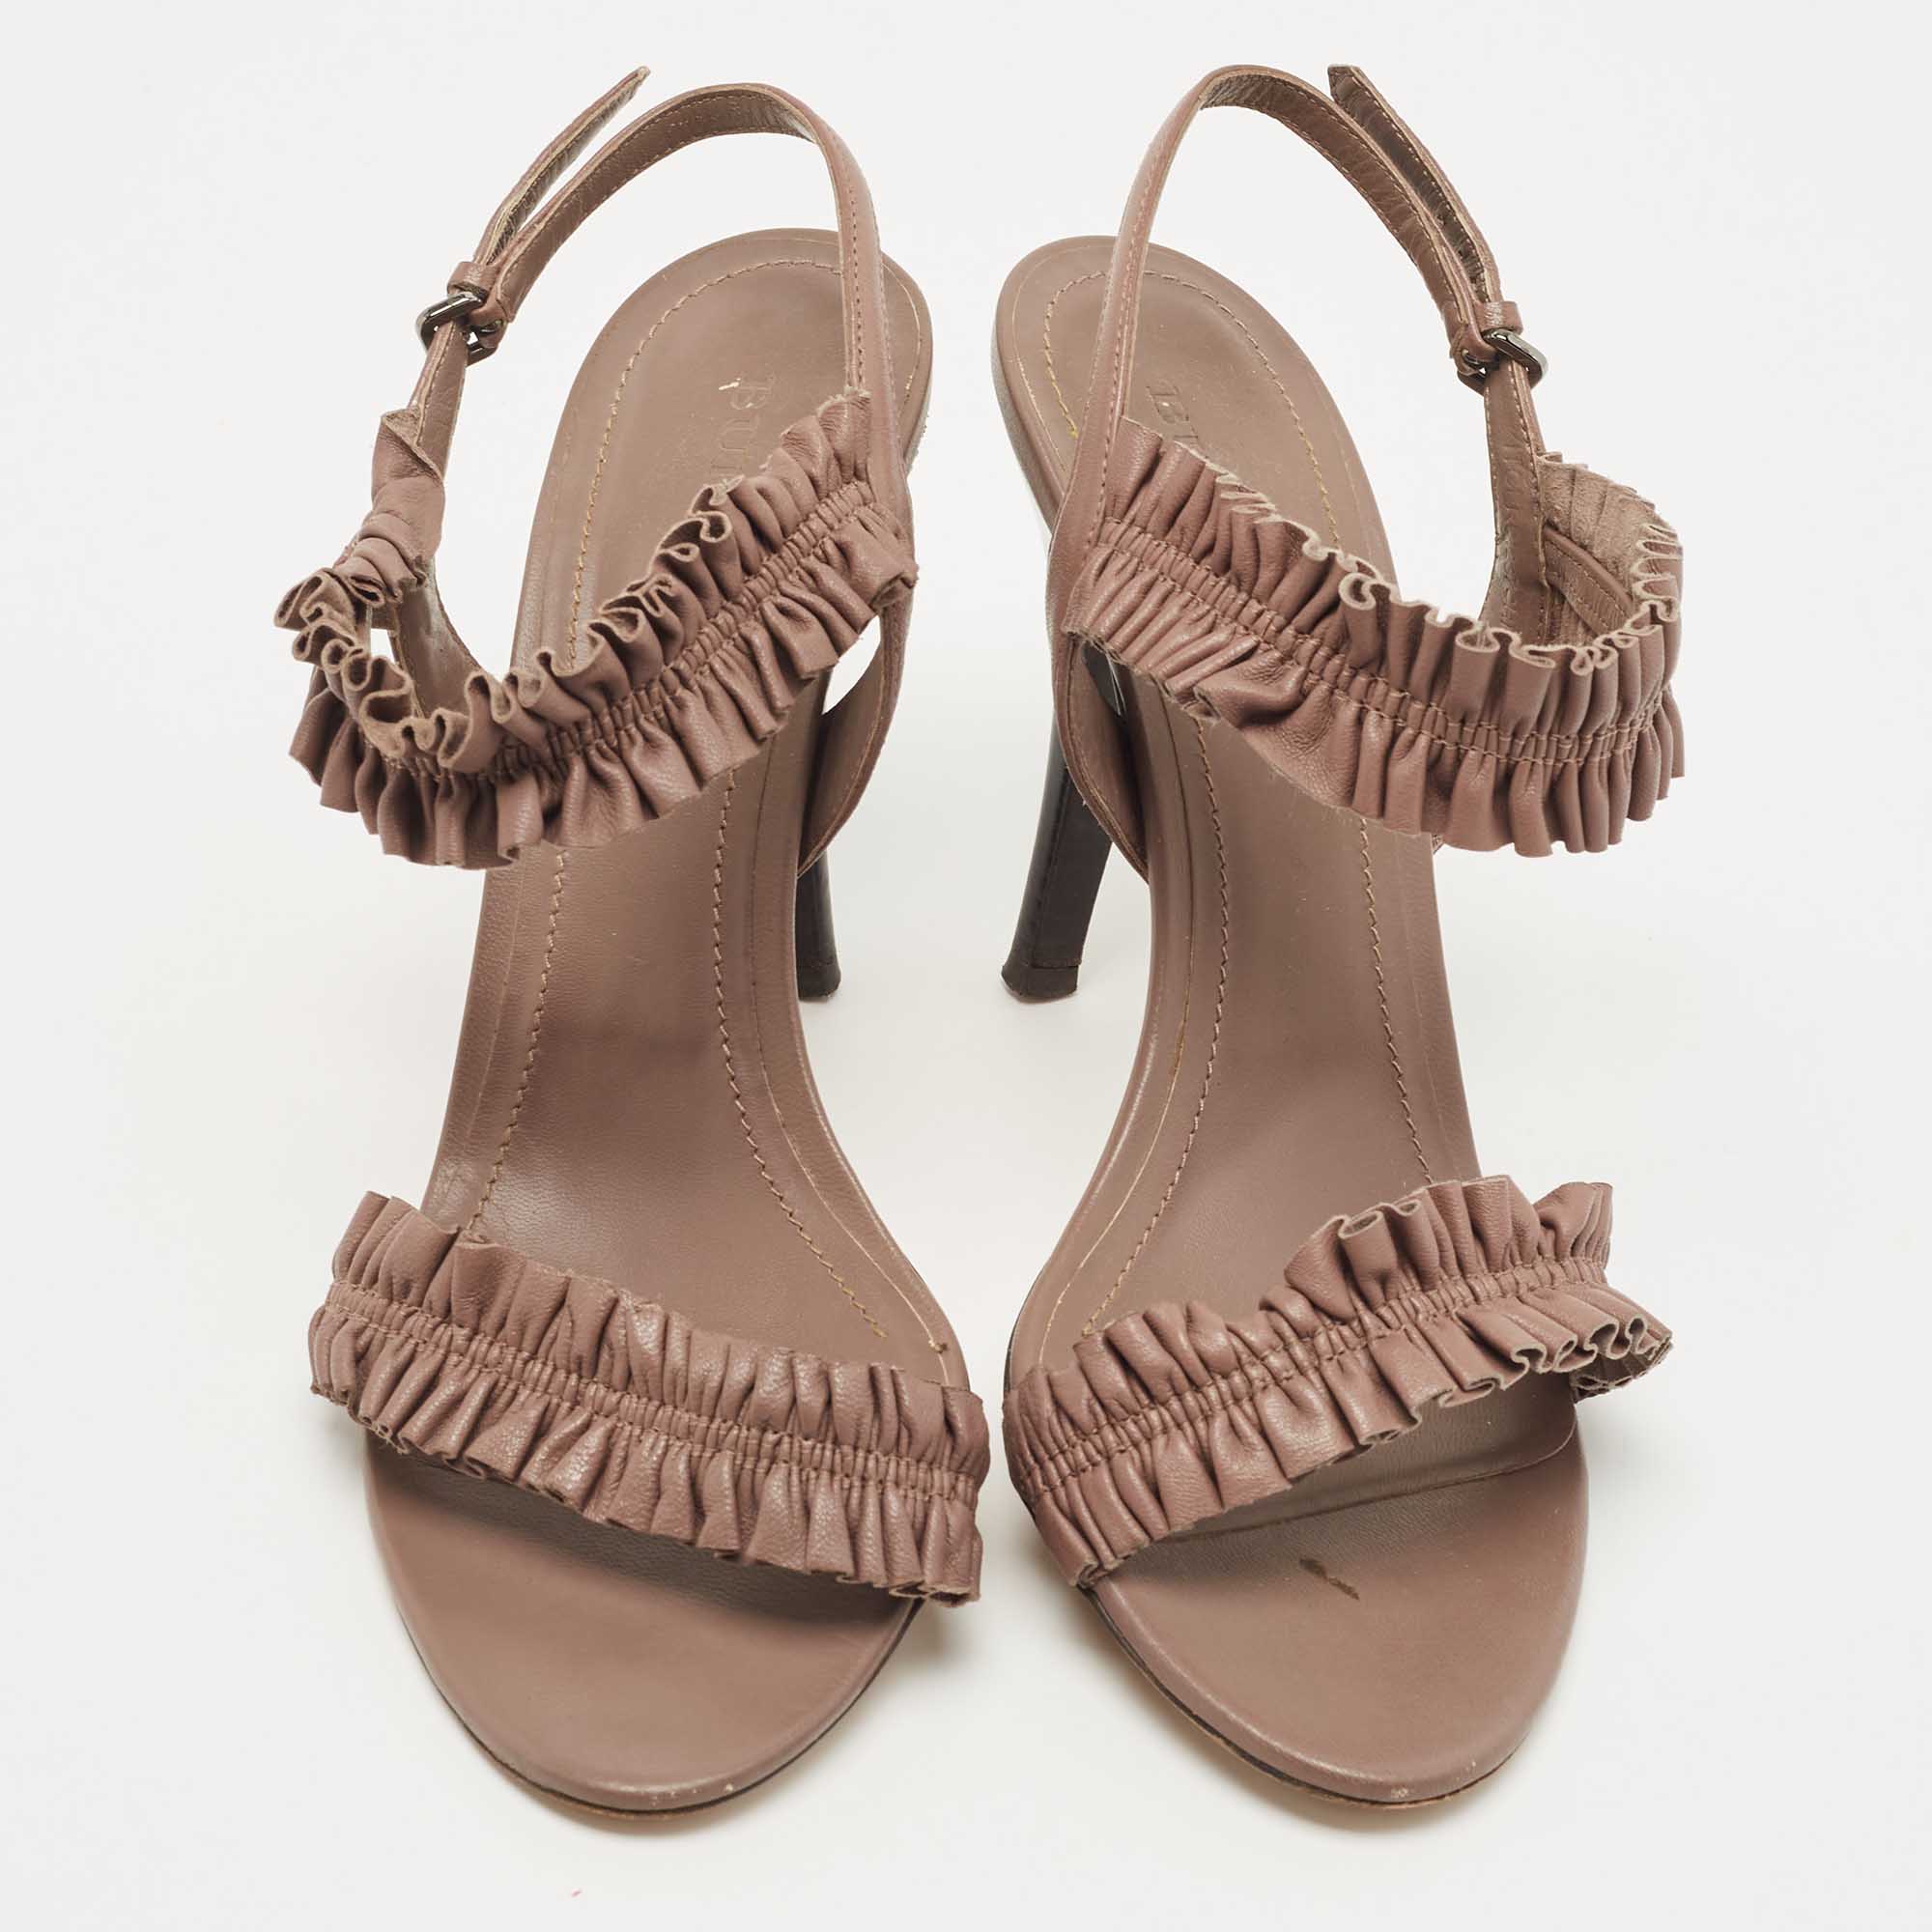 Burberry Brown Leather Ruffle Ankle Strap Sandals Size 39